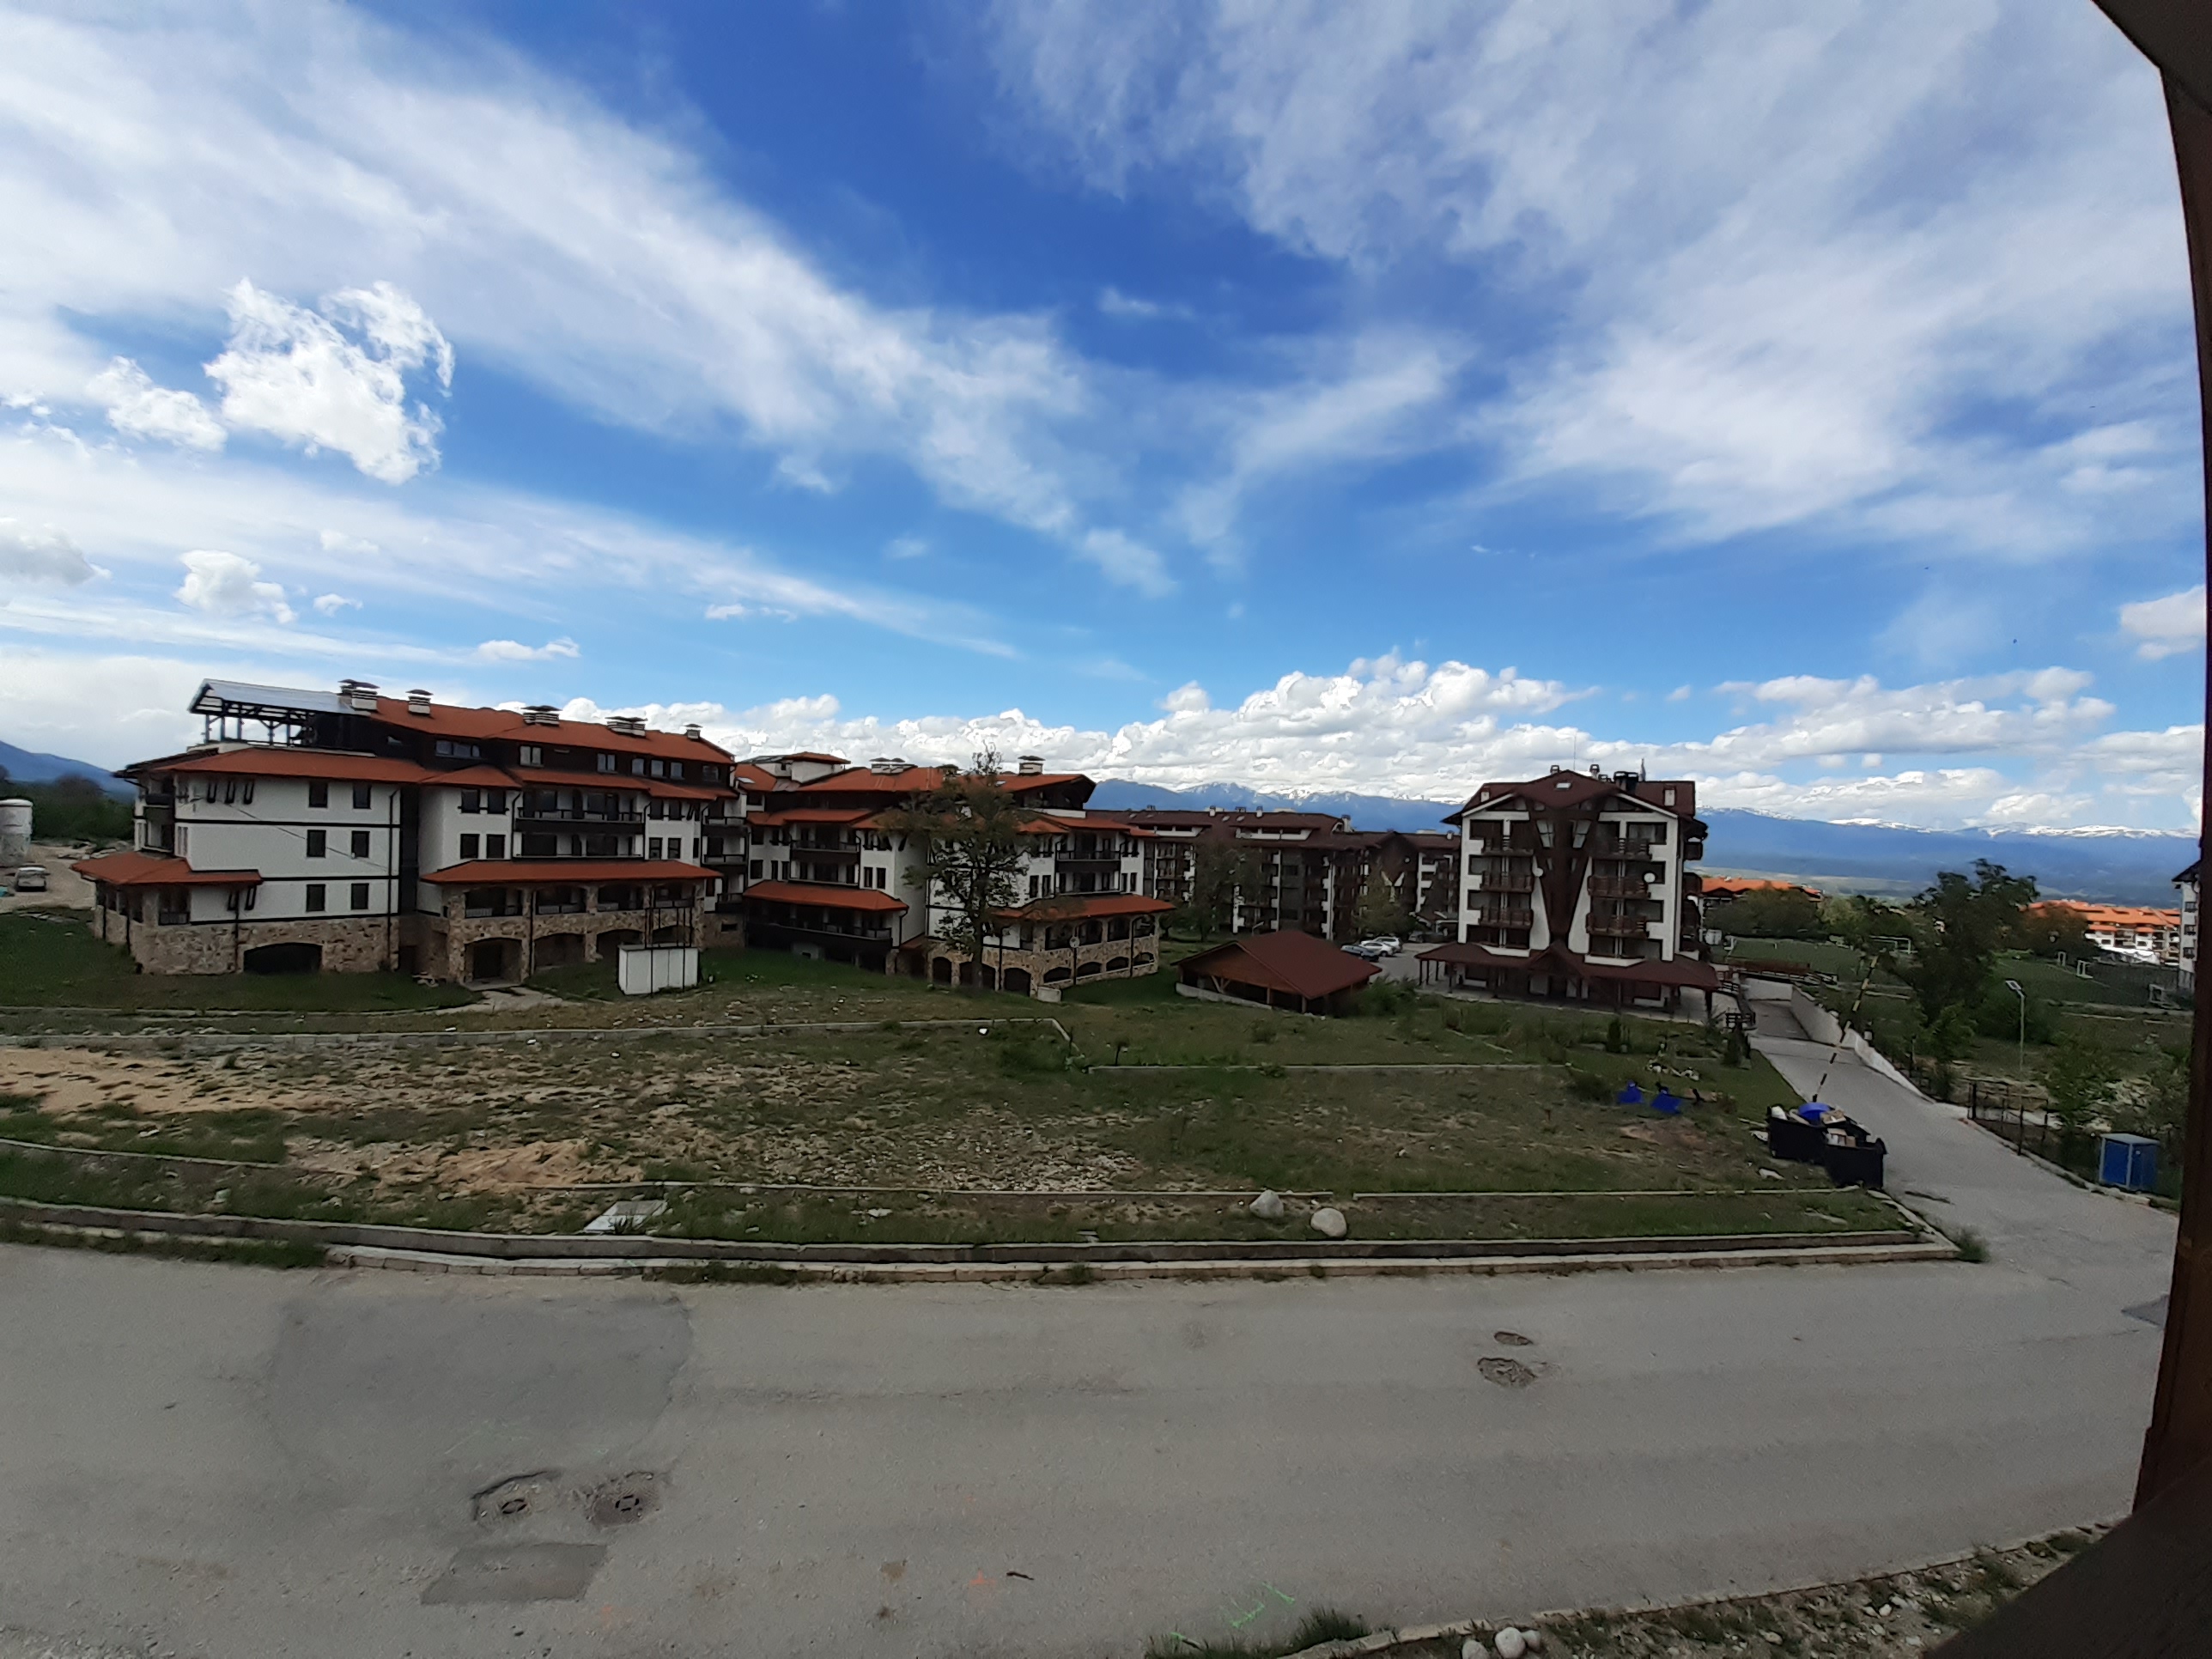 Bansko Royal Towers: Apartment for sale next to the Ski lift